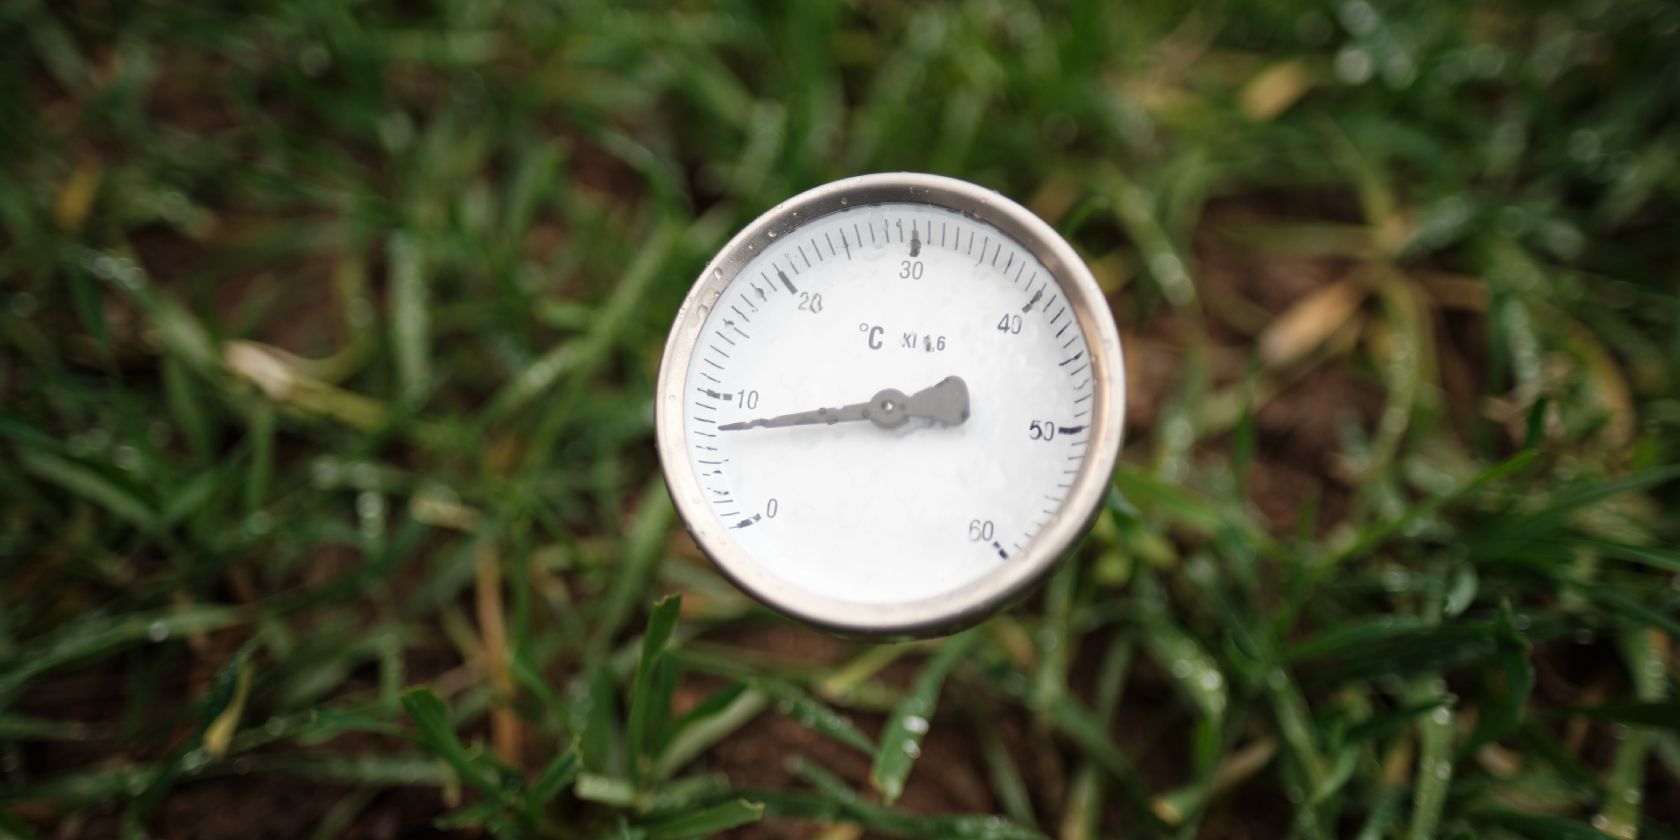 Soil thermometer in ground surrounded by grass